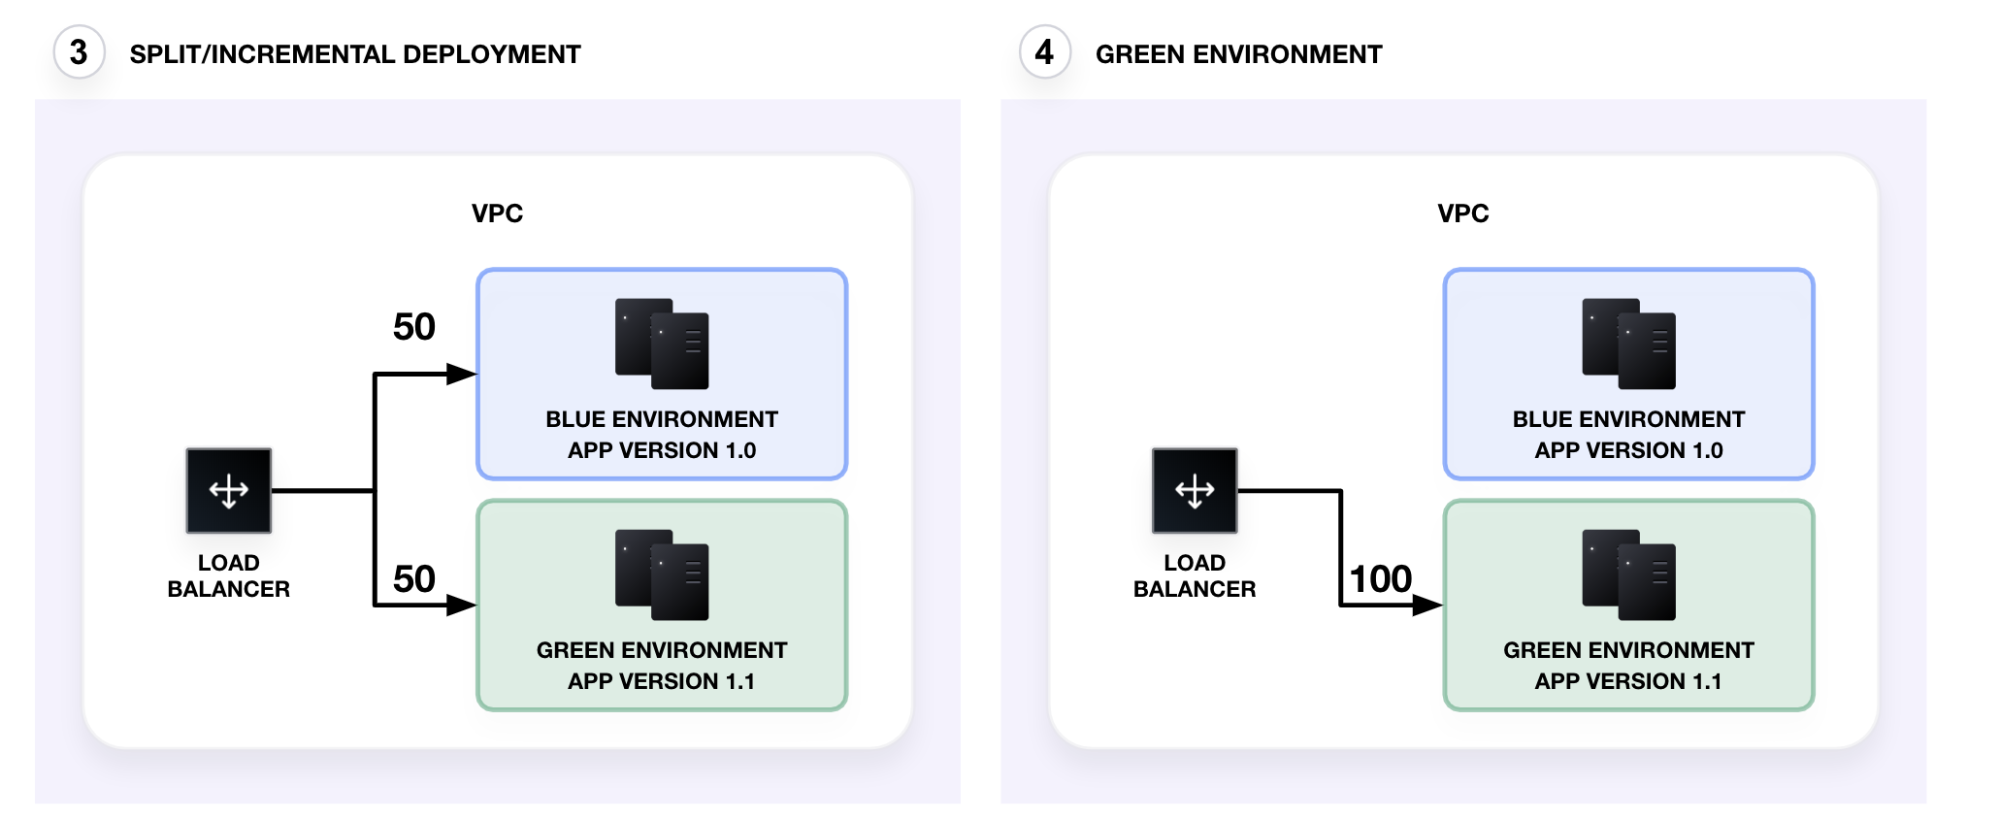 Rolling deployment. After the initial canary test, traffic to the green environment is split evenly with the blue environment (50/50). Finally, all traffic is directed to the green environment.